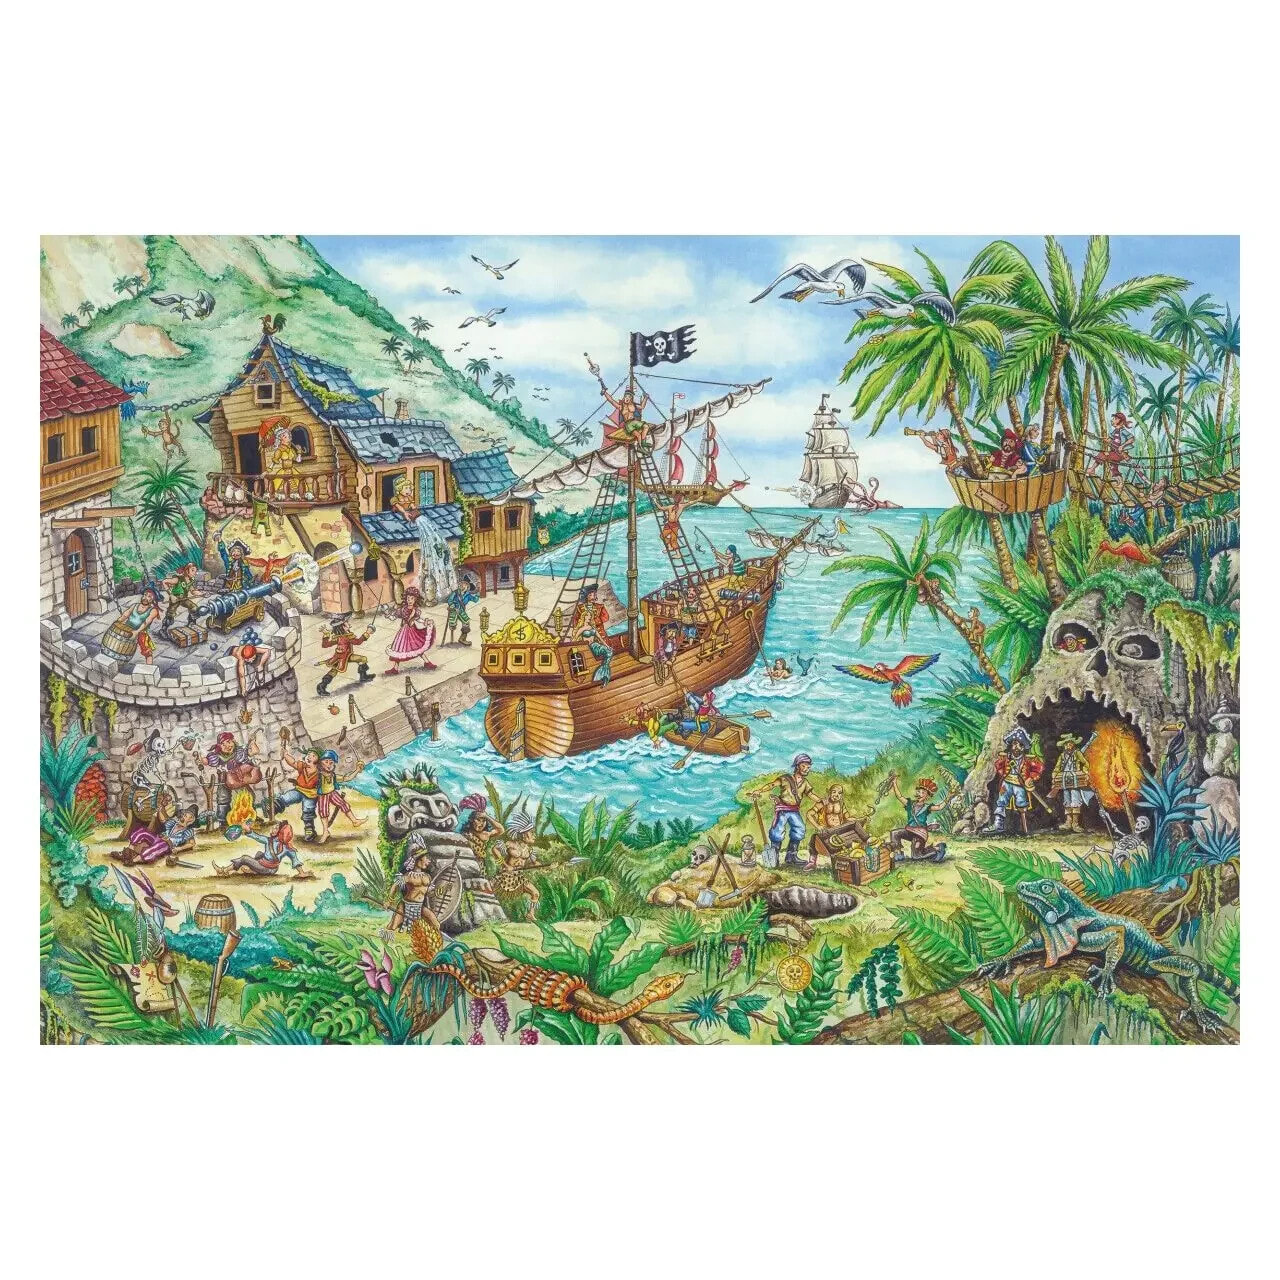 Puzzle Pirate Cove enthält Piratenflagge